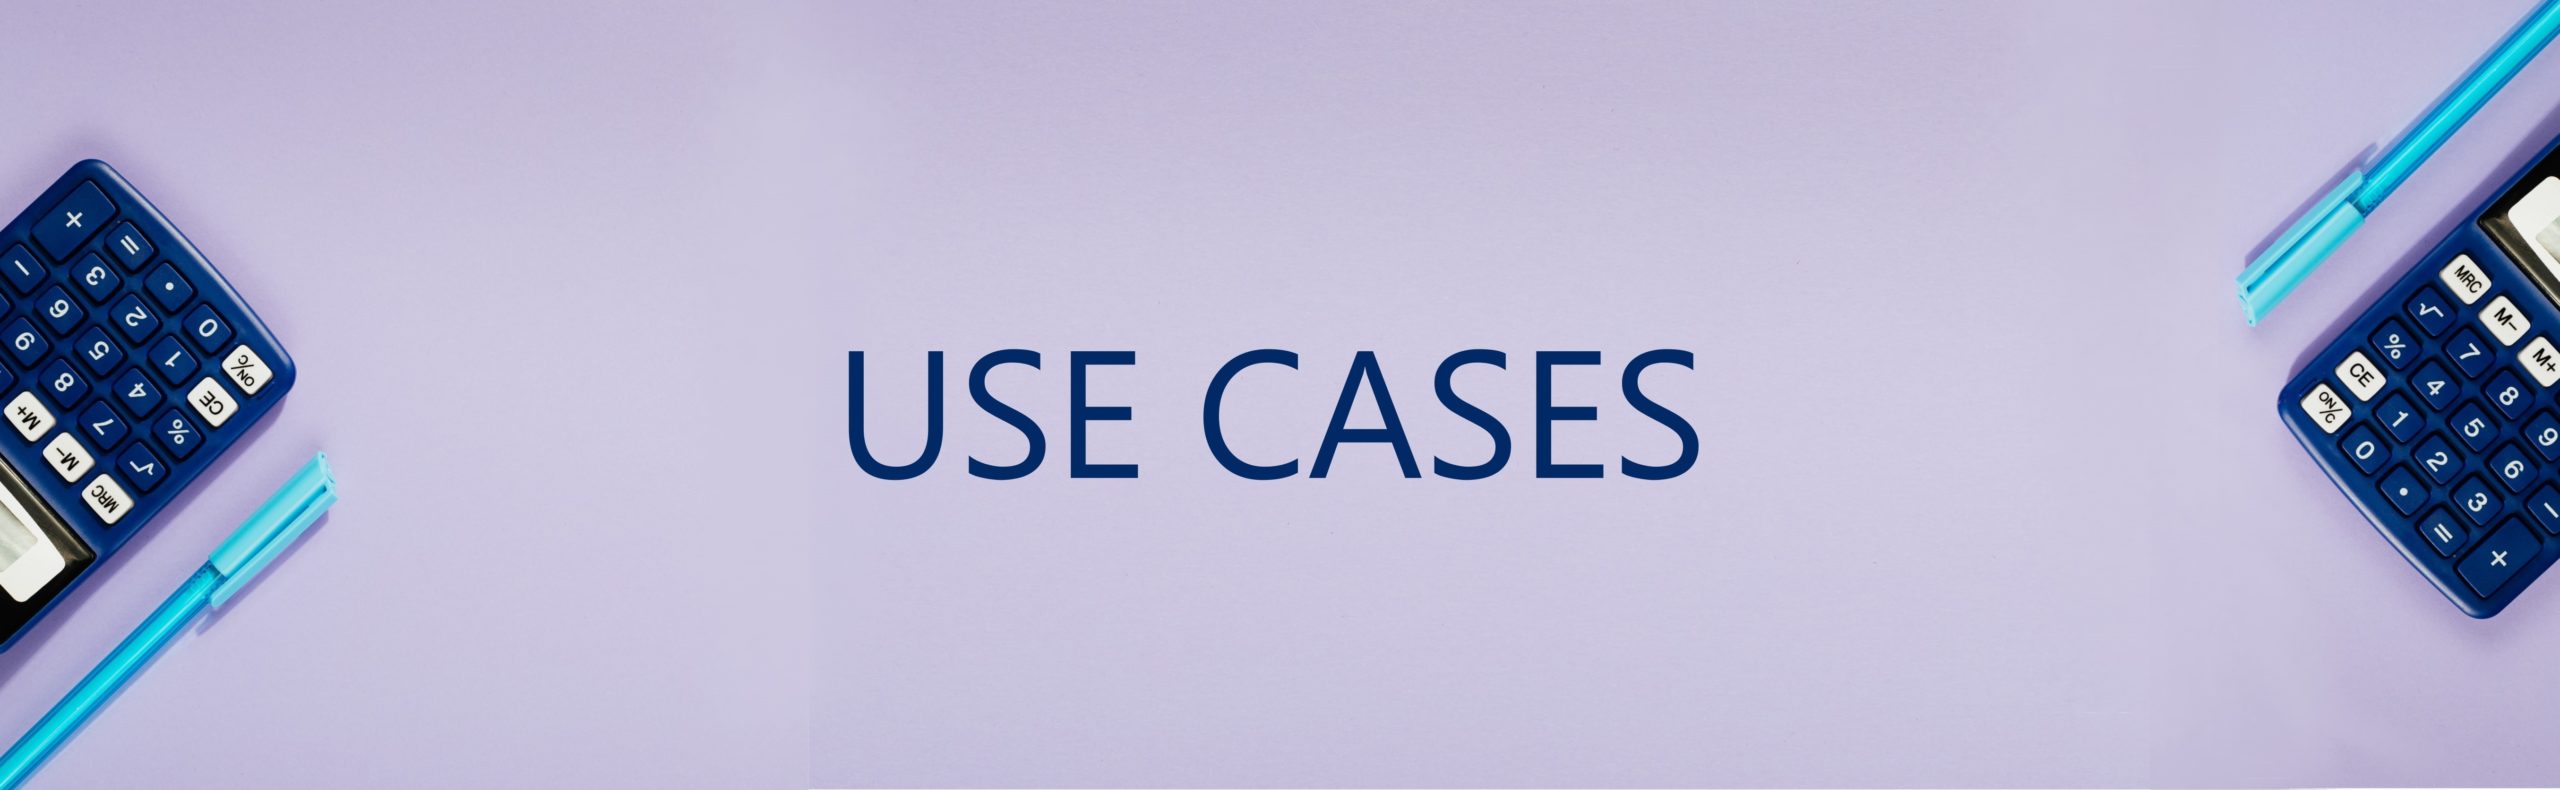 Use Cases Banner